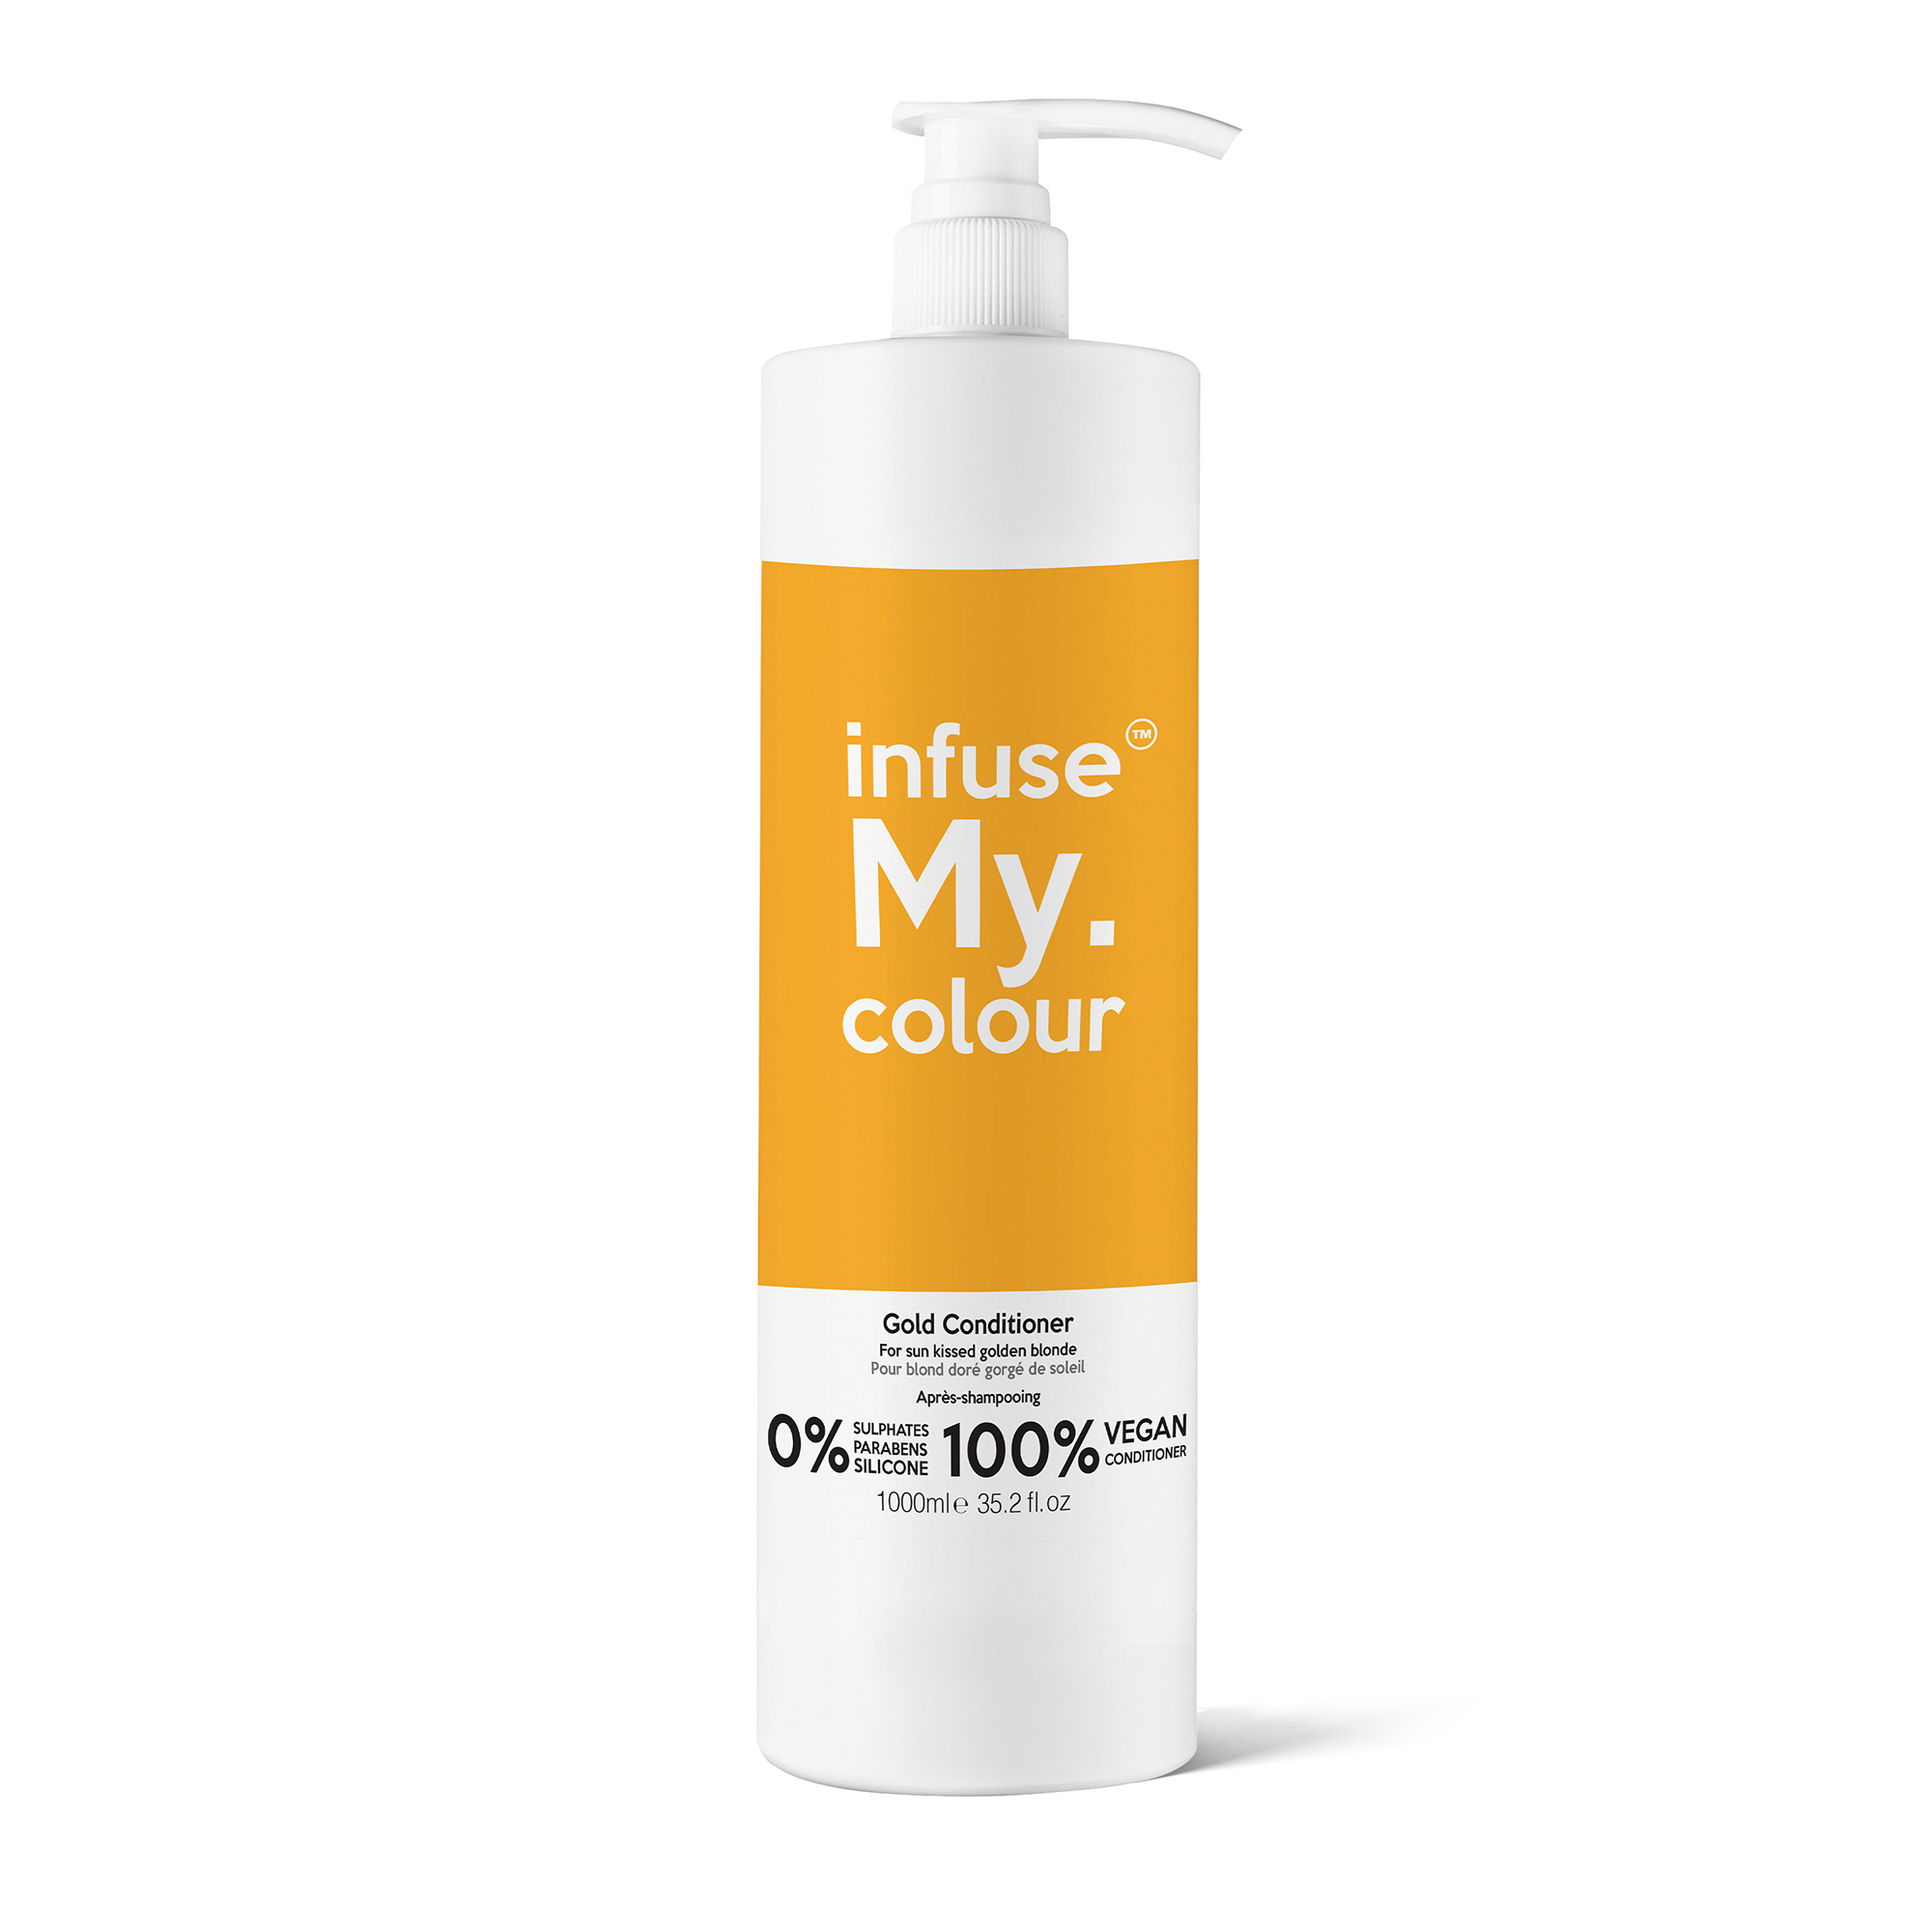 Infuse My Colour Gold Conditioner for Unisex 35.2 oz Conditioner